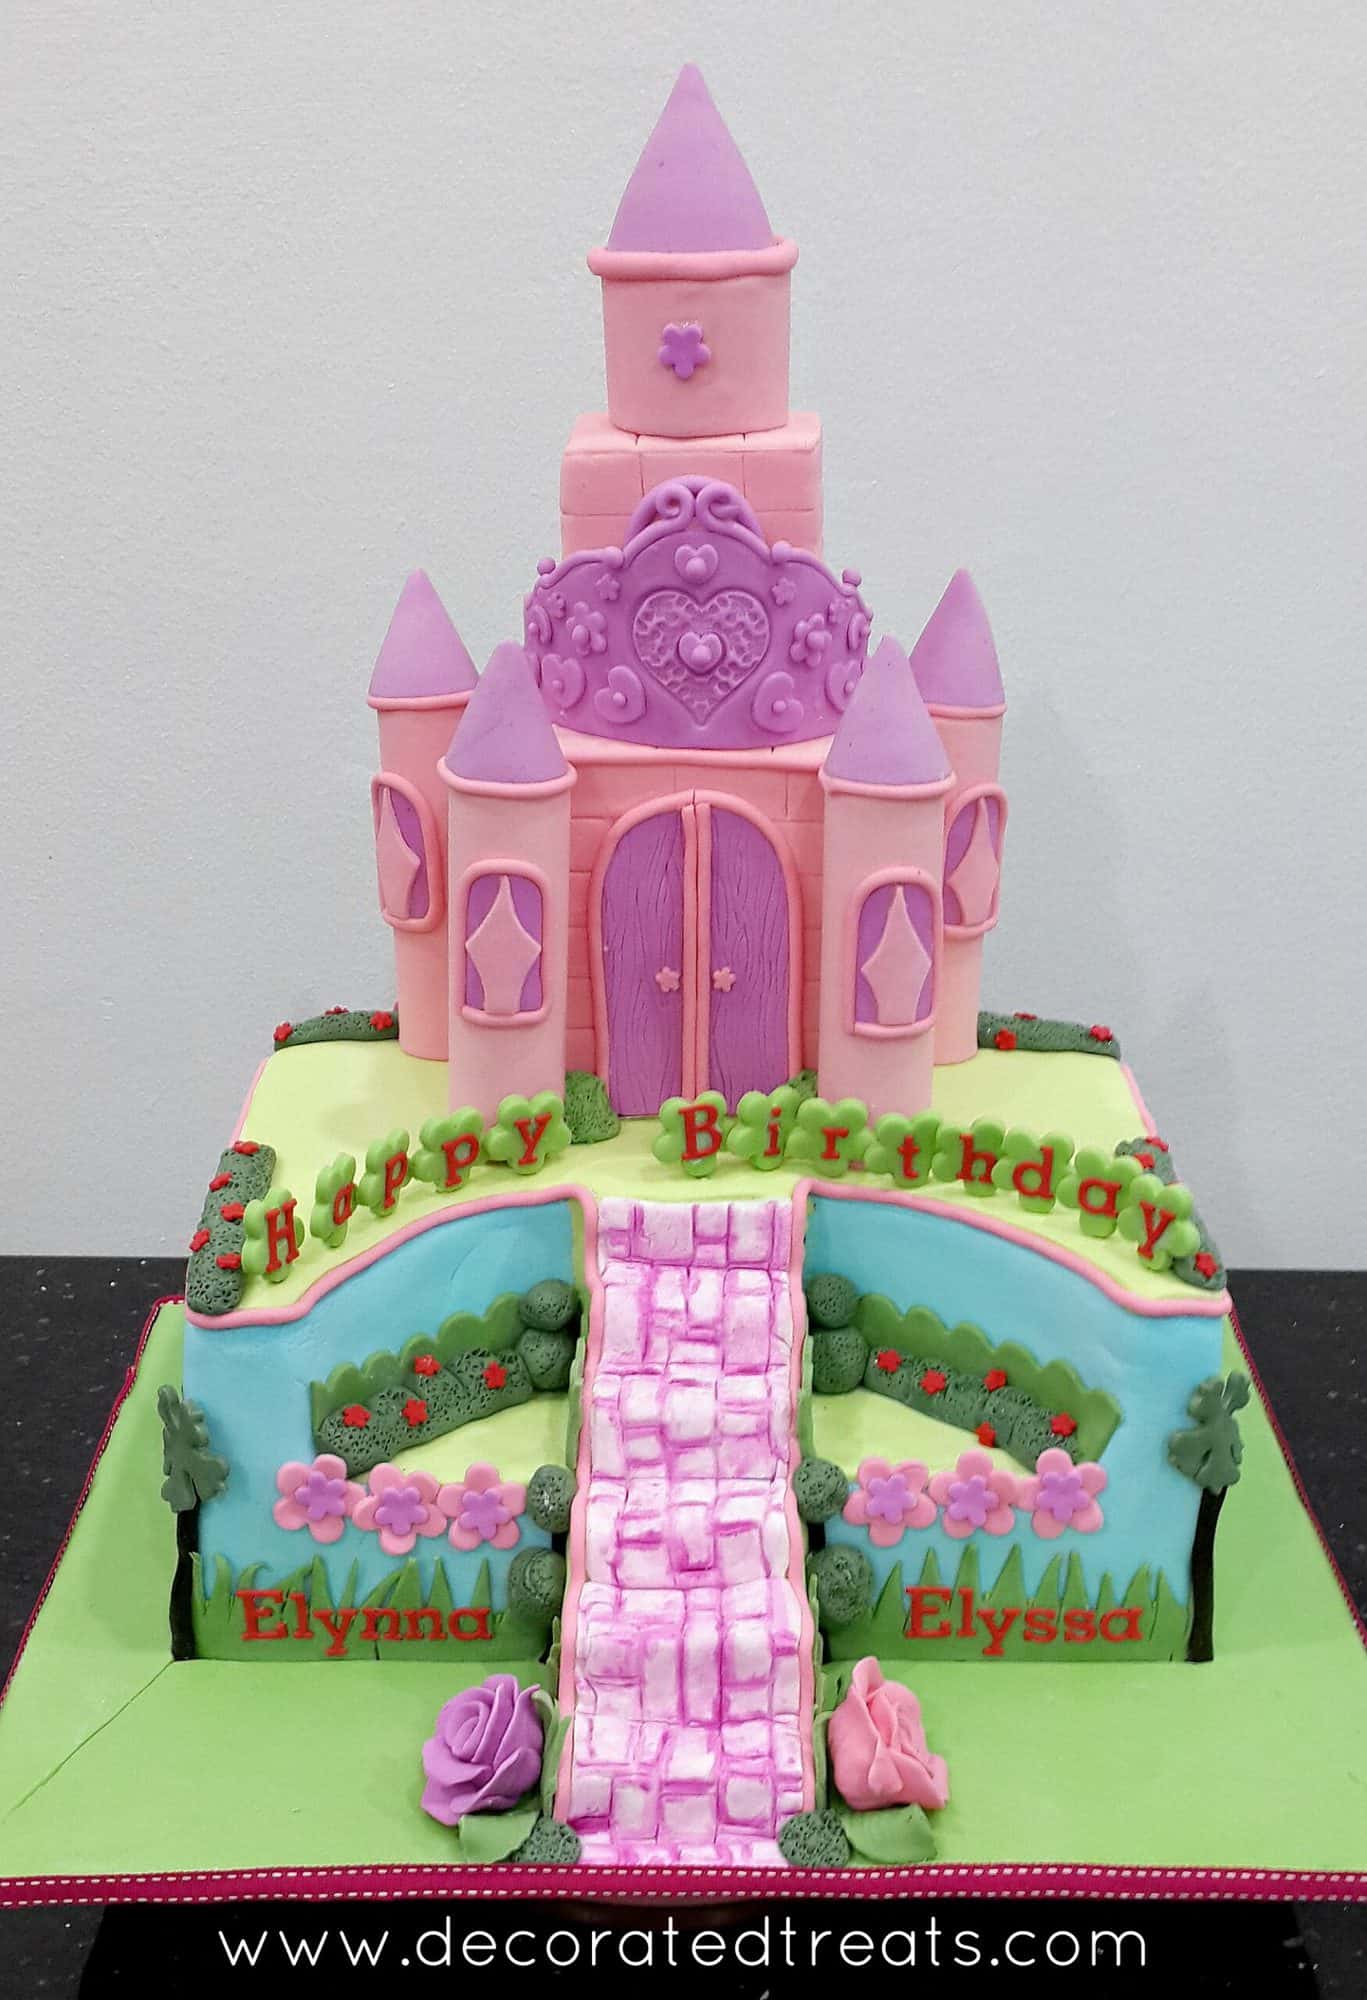 A rectangle cake with a pink castle cake topper.